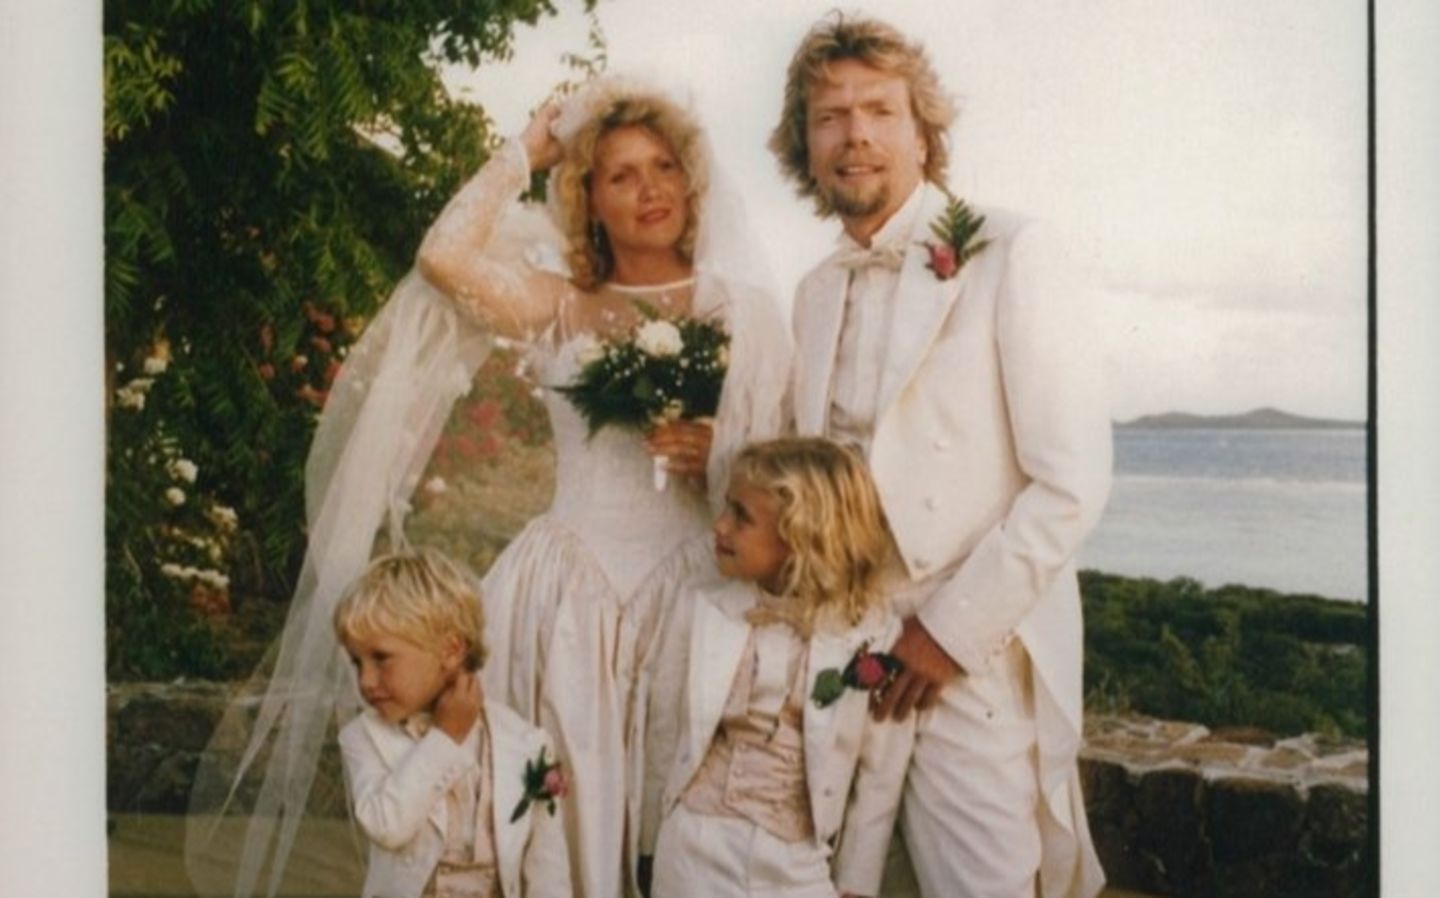 Richard Branson and his wife Joan on their wedding day with their children Holly and Sam